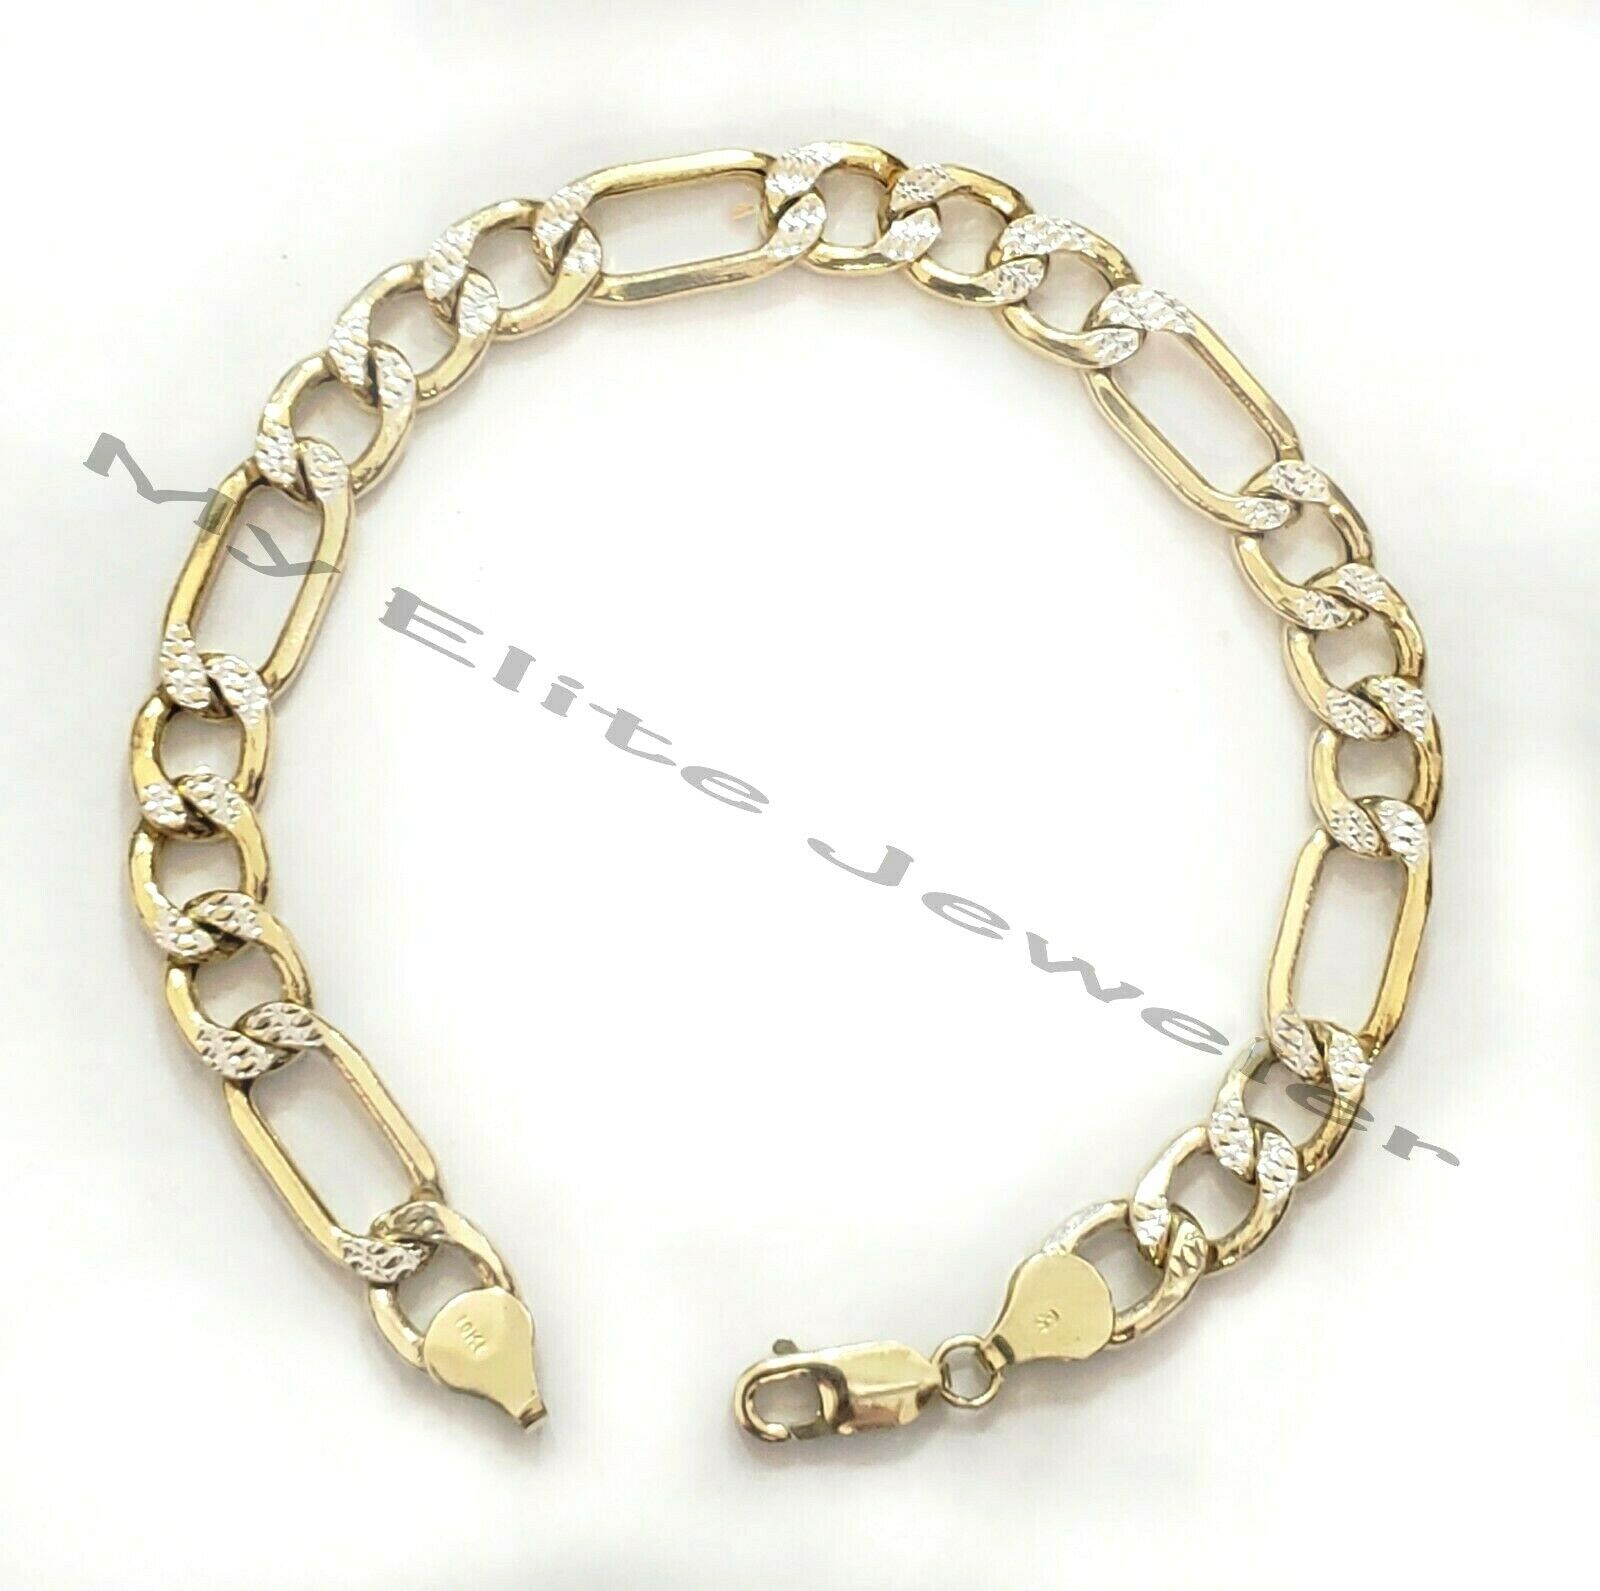 10k Yellow Gold Figaro Link Bracelet 7.5" Inch Diamond Cut 100% REAL 8mm , REAL